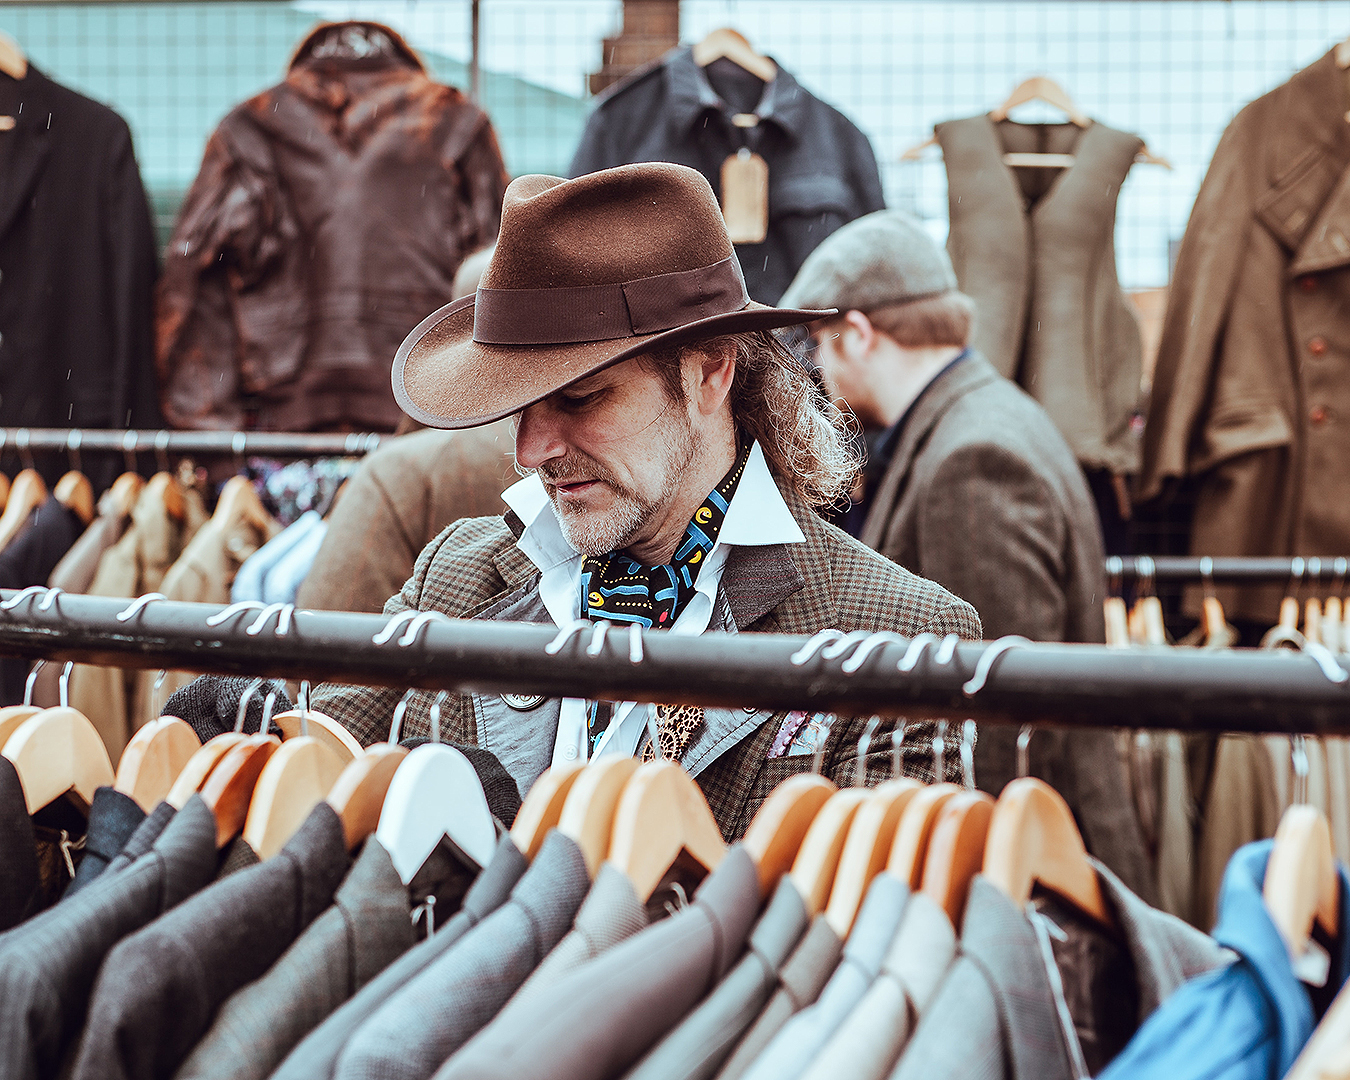 A man shops for new second hand threads.